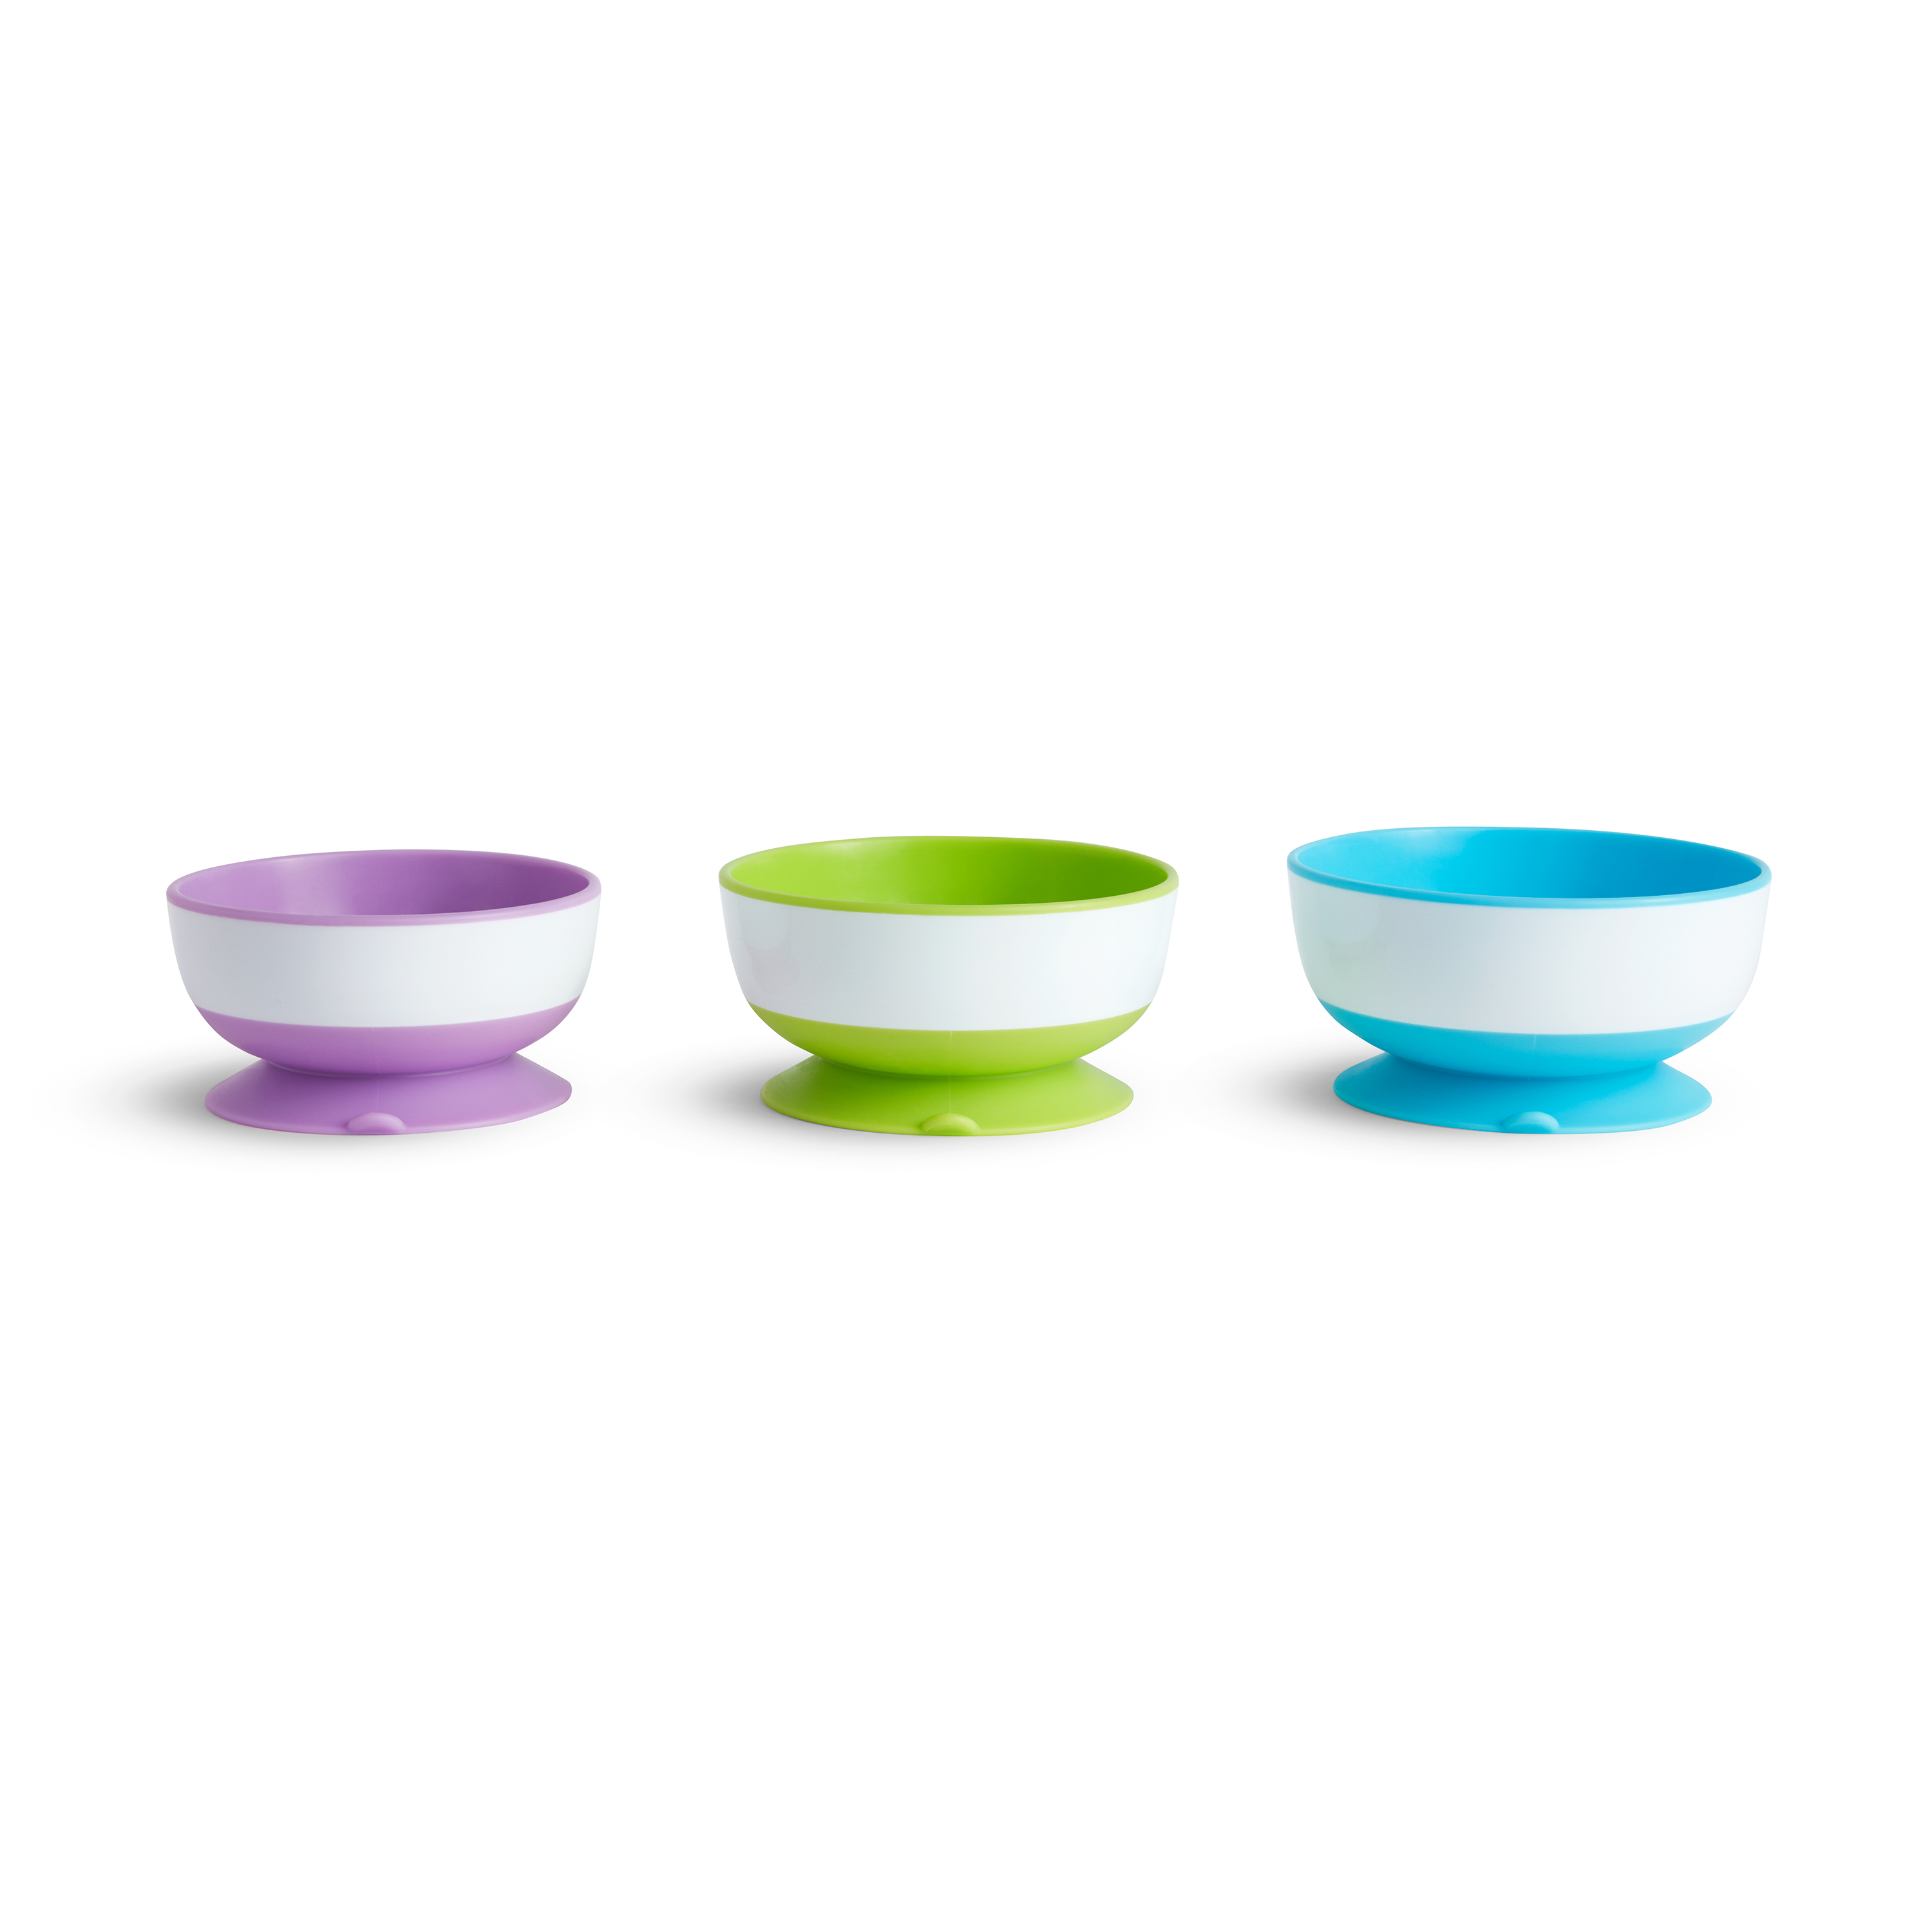 Munchkin® Stay Put Suction Round Bowls, Plastic, Multi-Color, 3 Pack - image 1 of 9